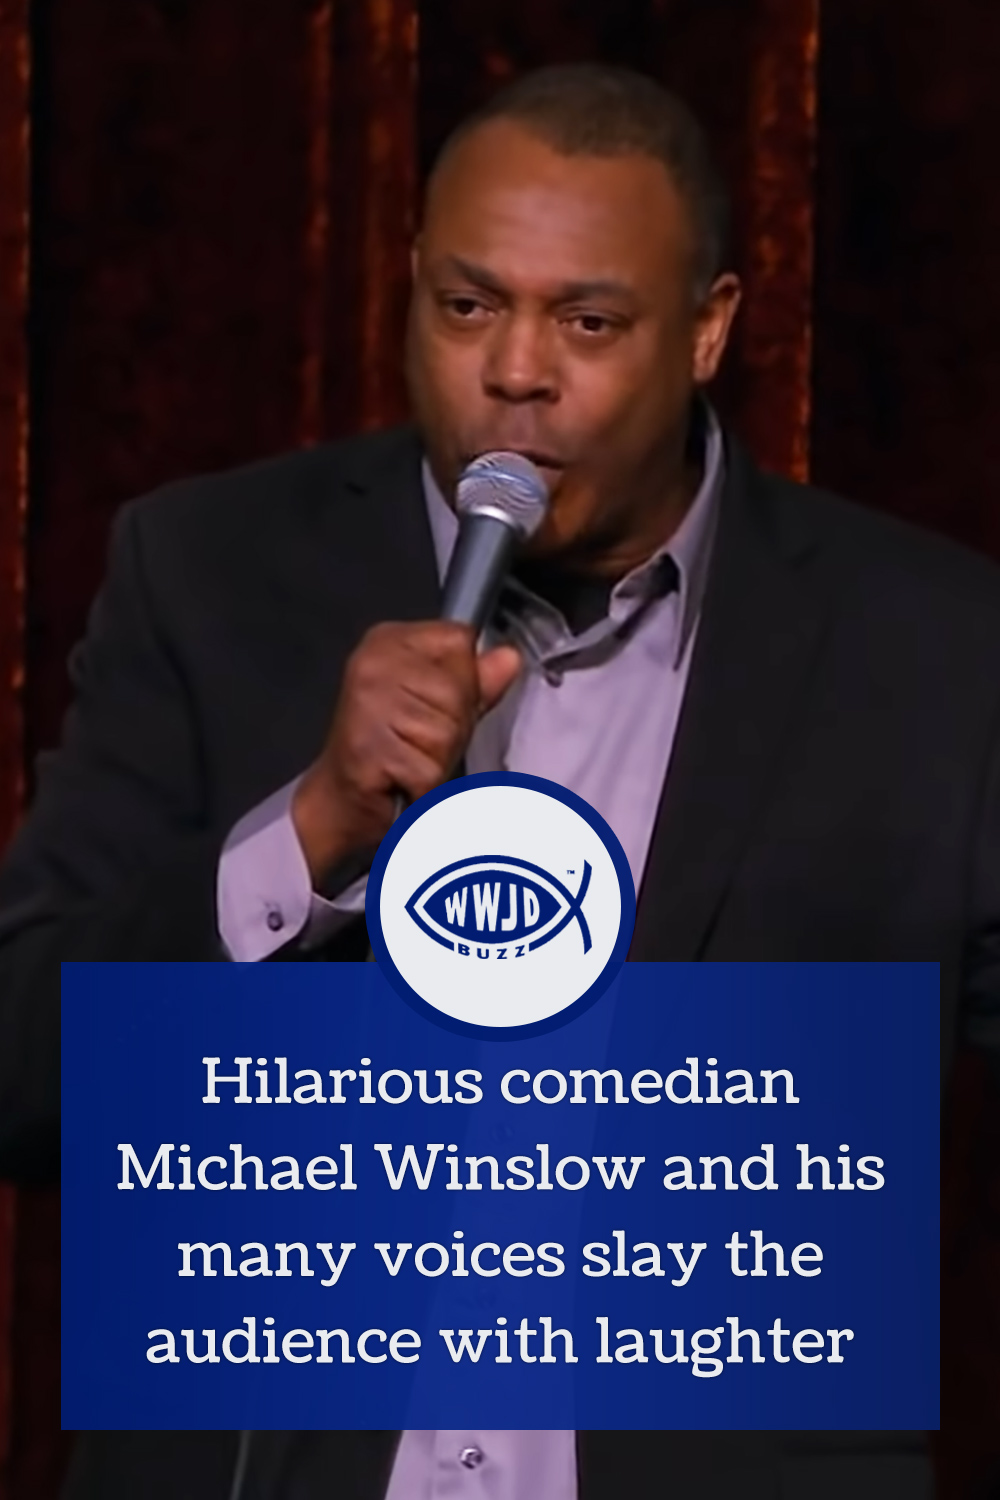 Hilarious comedian Michael Winslow and his many voices slay the audience with laughter